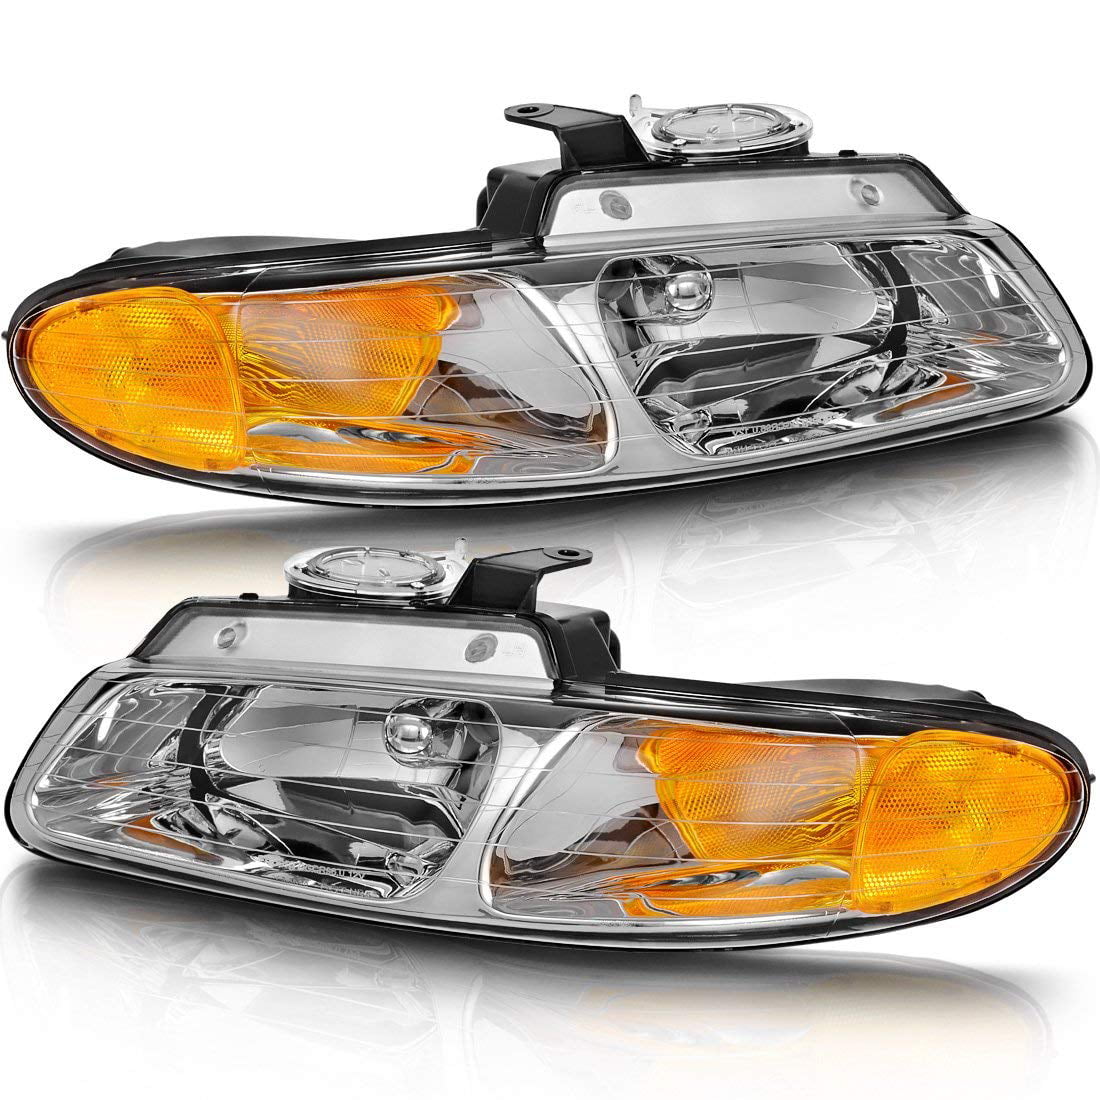 For 1996-2000 Dodge Caravan Chrysler Town & Country Headlights Lamps